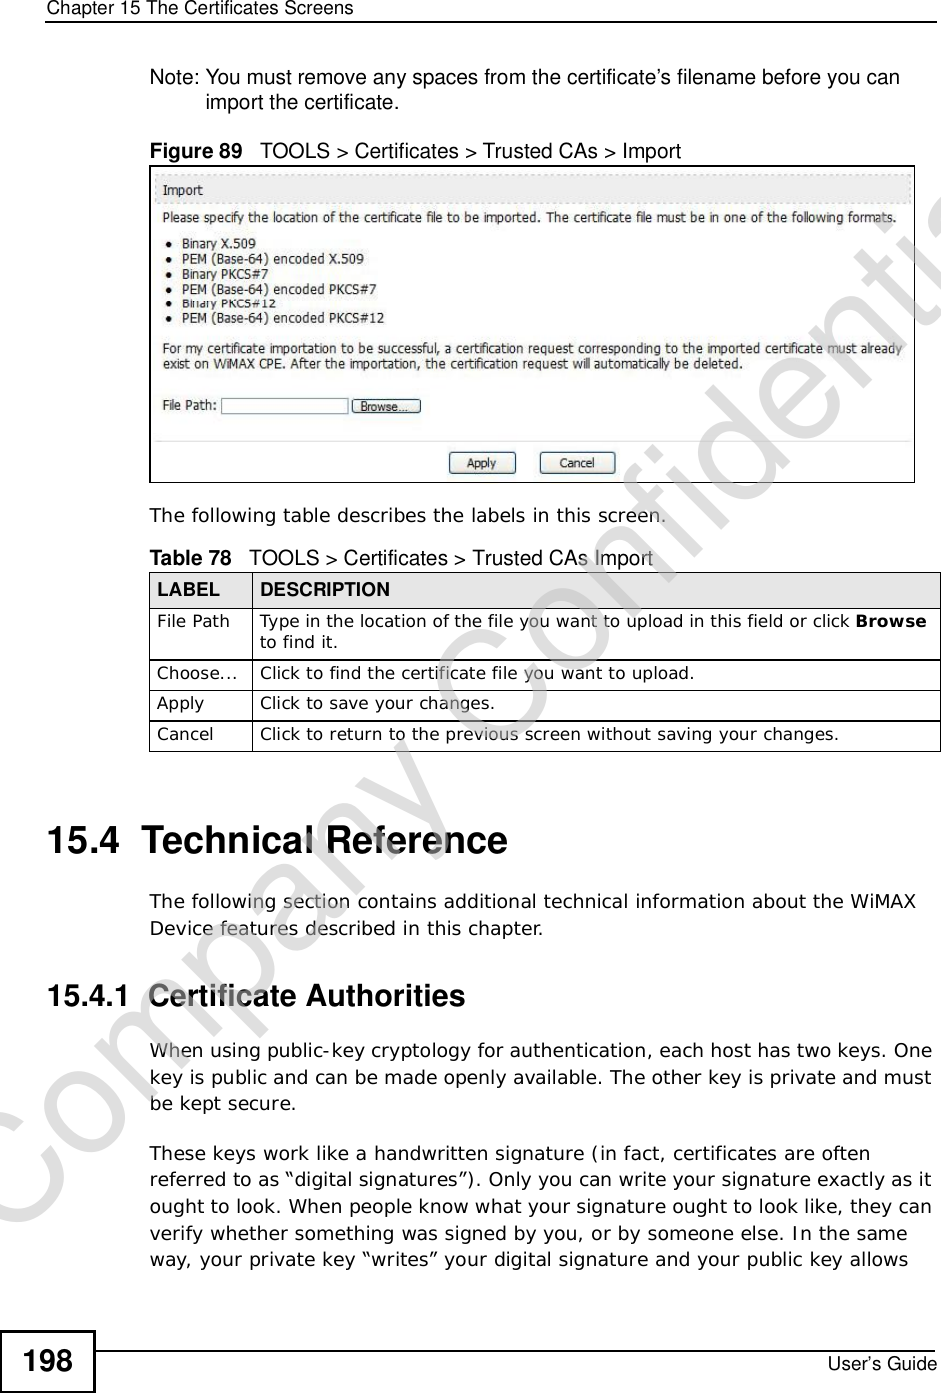 Chapter 15The Certificates ScreensUser’s Guide198Note: You must remove any spaces from the certificate’s filename before you can import the certificate.Figure 89   TOOLS &gt; Certificates &gt; Trusted CAs &gt; ImportThe following table describes the labels in this screen.15.4  Technical ReferenceThe following section contains additional technical information about the WiMAX Device features described in this chapter.15.4.1  Certificate AuthoritiesWhen using public-key cryptology for authentication, each host has two keys. One key is public and can be made openly available. The other key is private and must be kept secure. These keys work like a handwritten signature (in fact, certificates are often referred to as “digital signatures”). Only you can write your signature exactly as it ought to look. When people know what your signature ought to look like, they can verify whether something was signed by you, or by someone else. In the same way, your private key “writes” your digital signature and your public key allows Table 78   TOOLS &gt; Certificates &gt; Trusted CAs ImportLABEL DESCRIPTIONFile Path Type in the location of the file you want to upload in this field or click Browseto find it.Choose... Click to find the certificate file you want to upload. Apply Click to save your changes.Cancel Click to return to the previous screen without saving your changes.Company Confidential